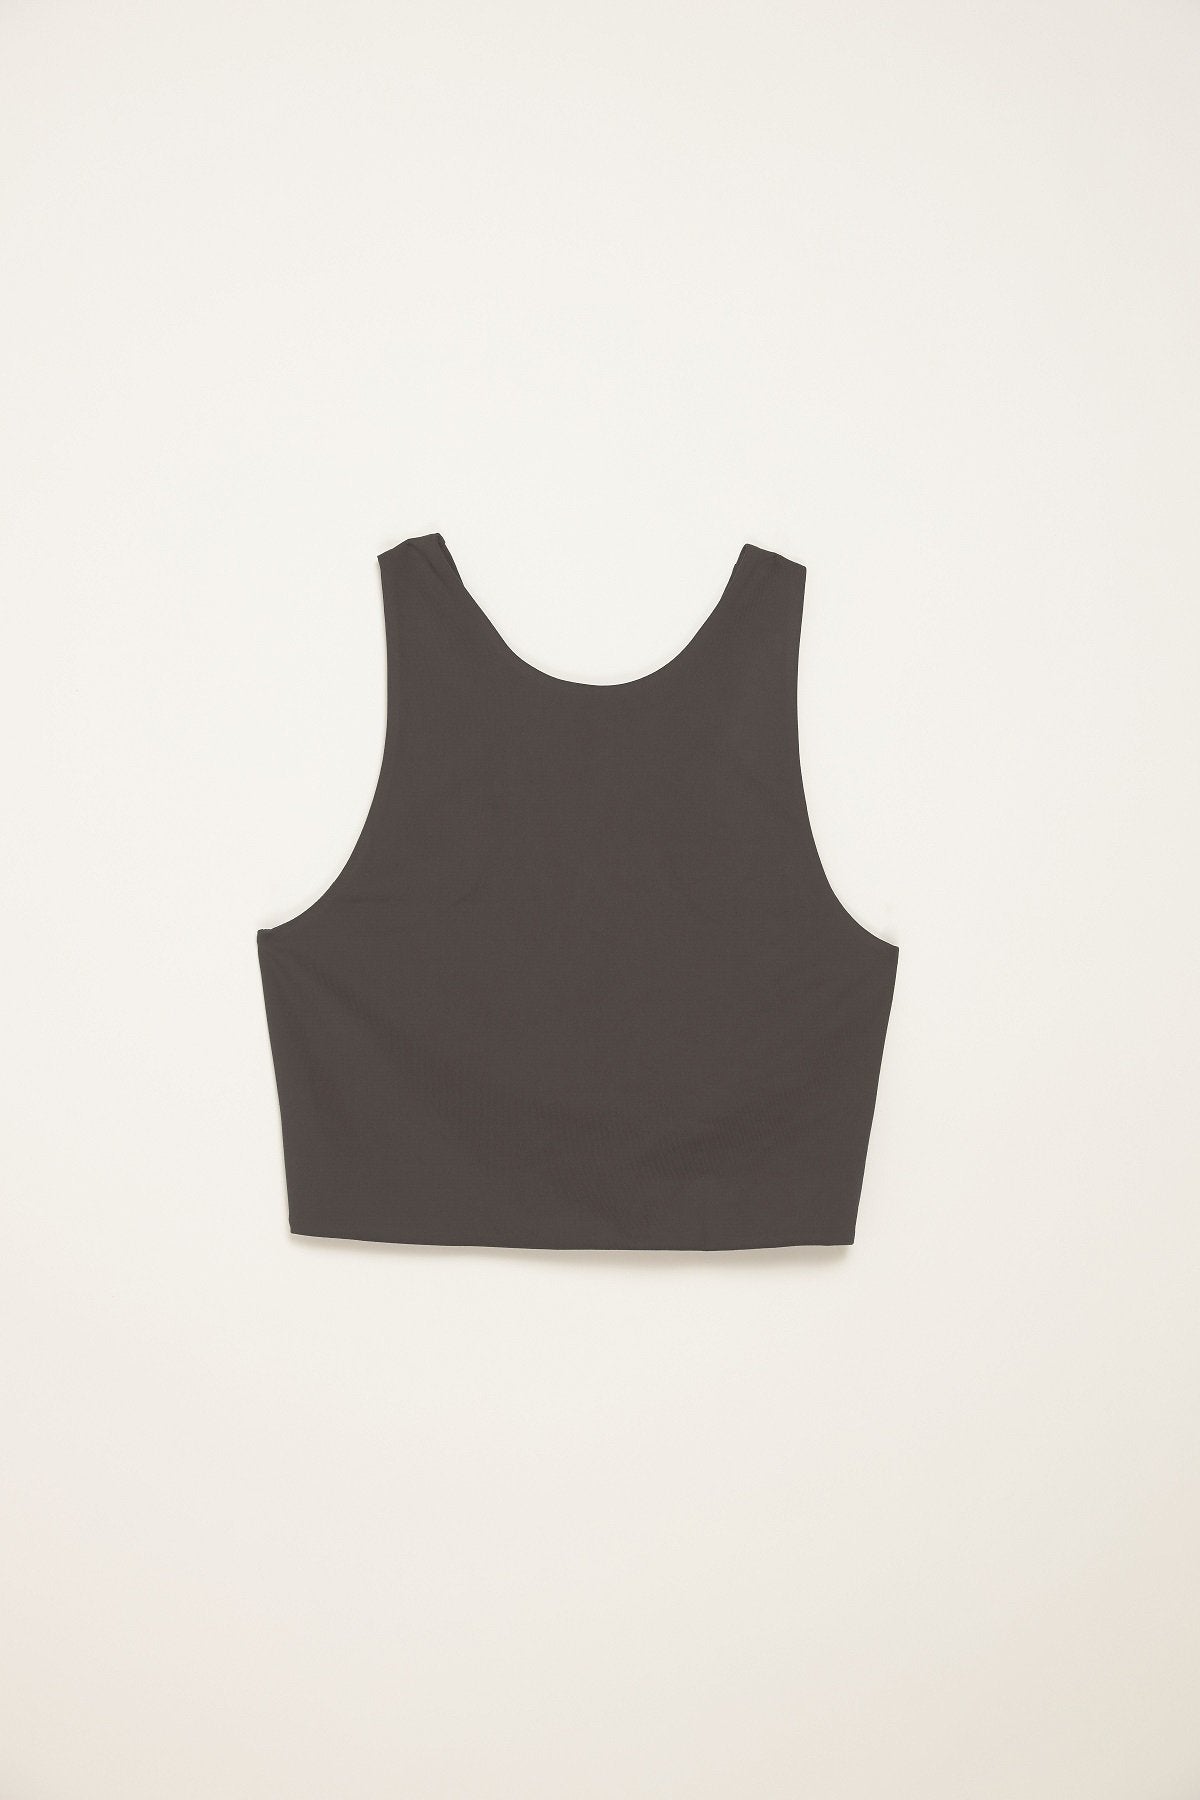 Girlfriend Collective Dylan Crop Tank Bra - Made from Recycled Plastic Bottles Moon Underwear